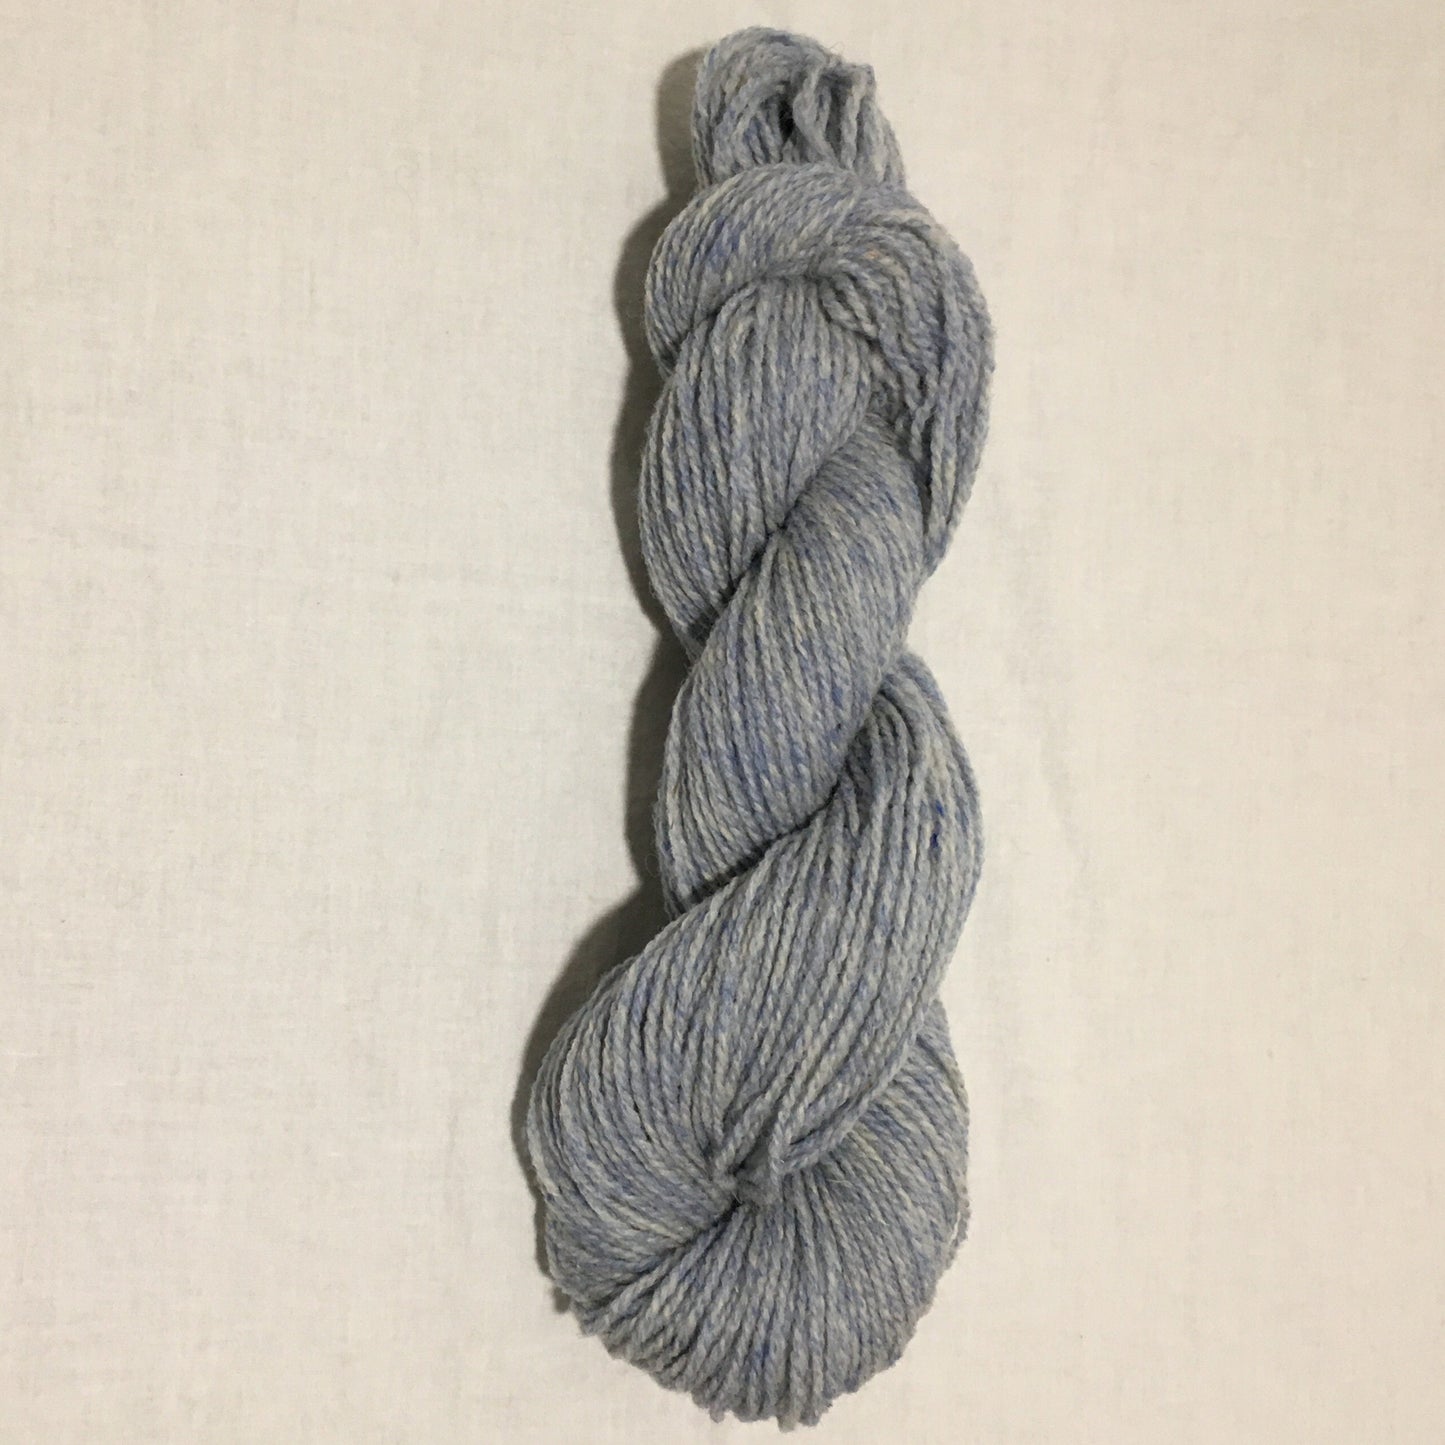 Worsted two ply - 11 shades available